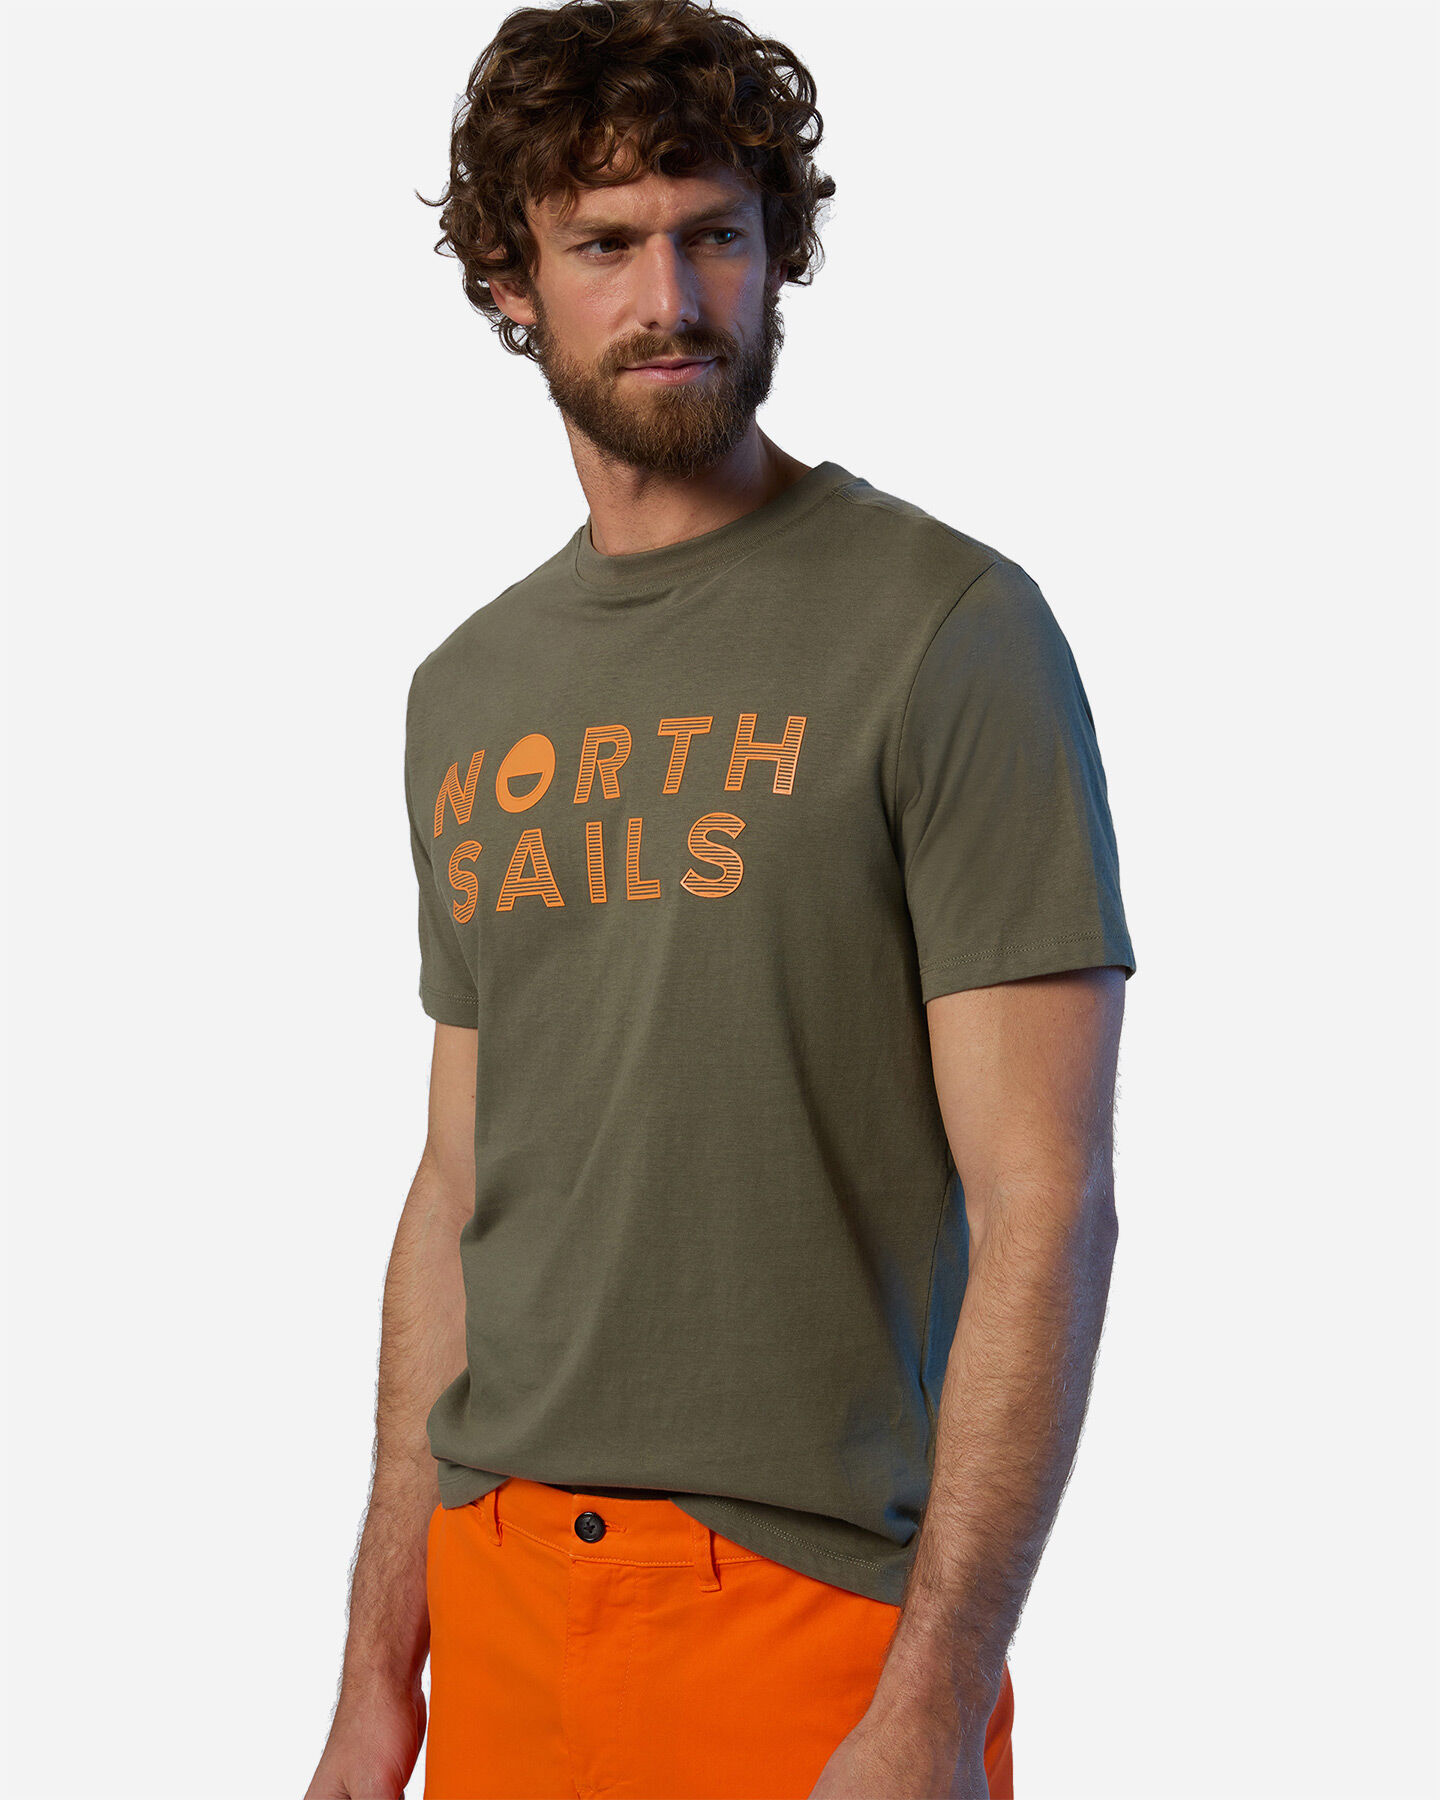  T-Shirt NORTH SAILS LINEAR LOGO M S5684006|0441|S scatto 2